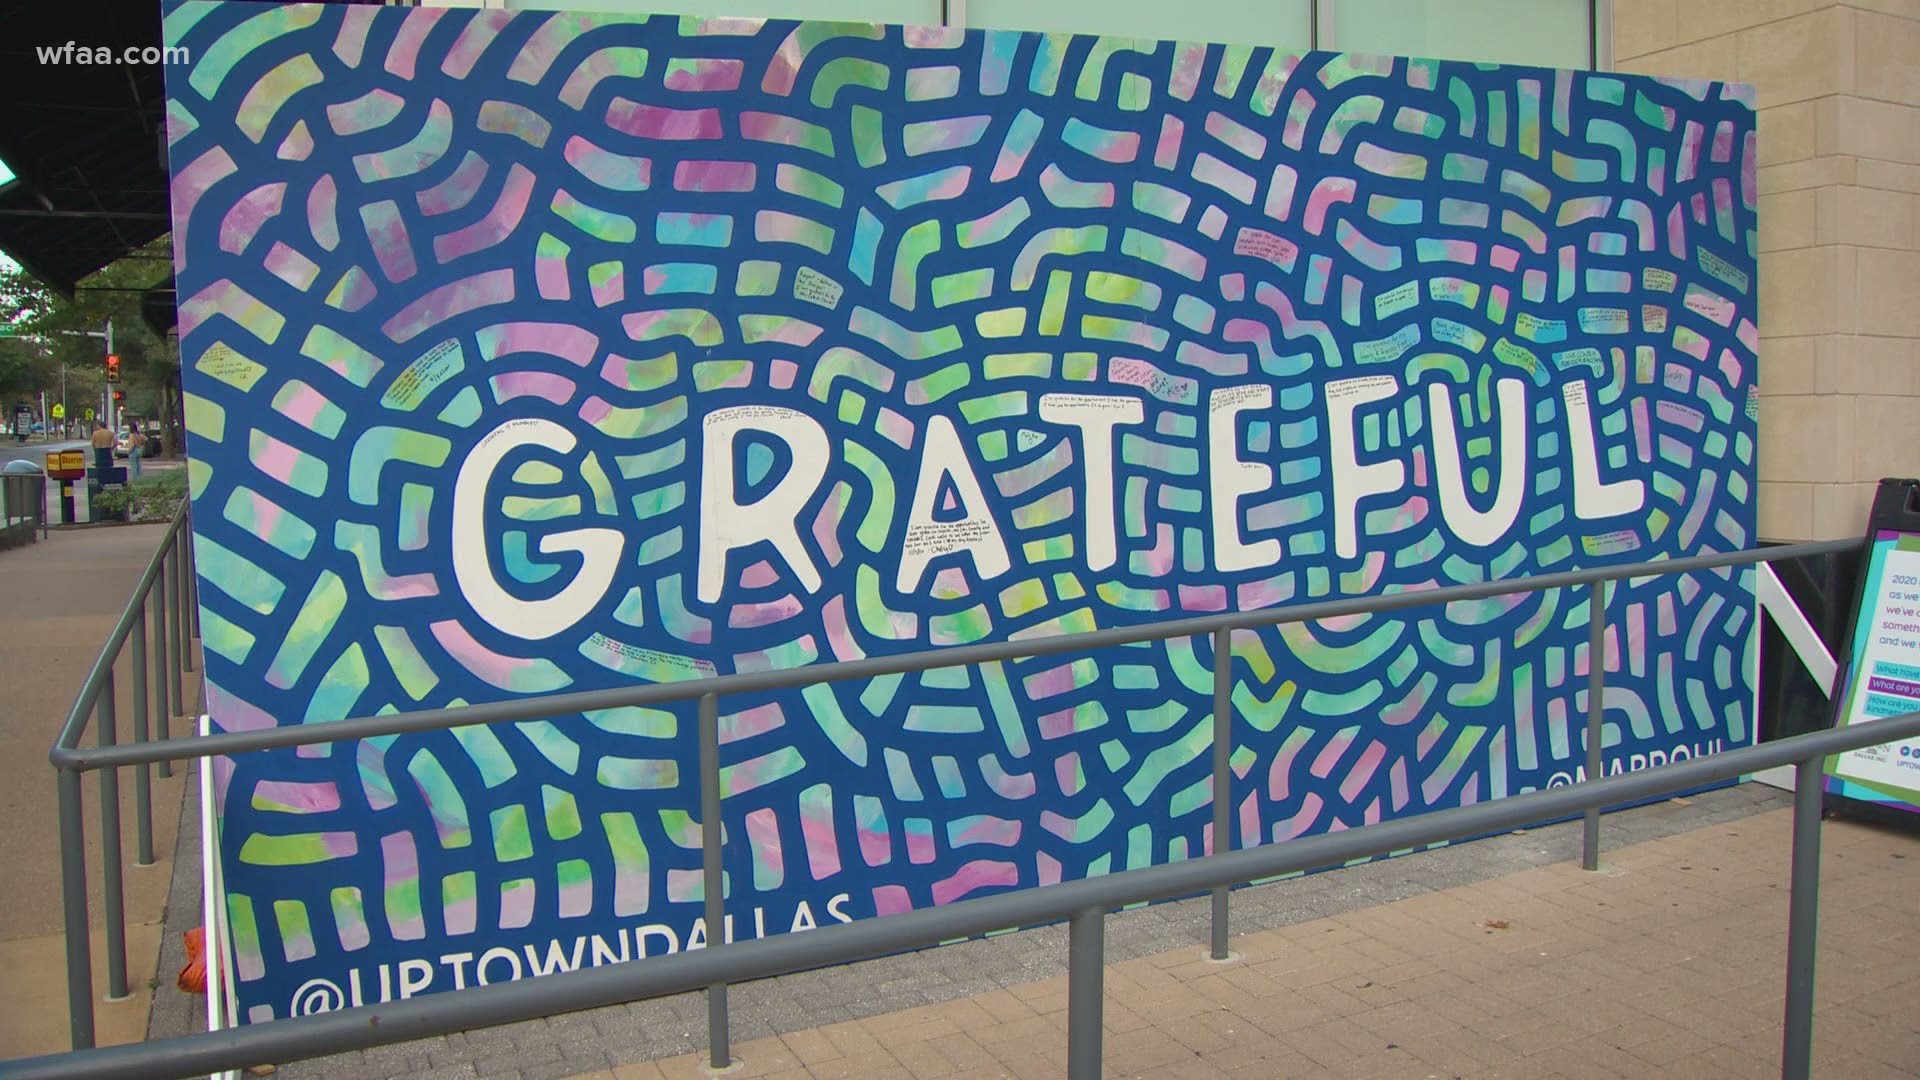 The "Grateful" wall is a public art project that invites people to grab a Sharpie and leave notes of positivity during challenging times.